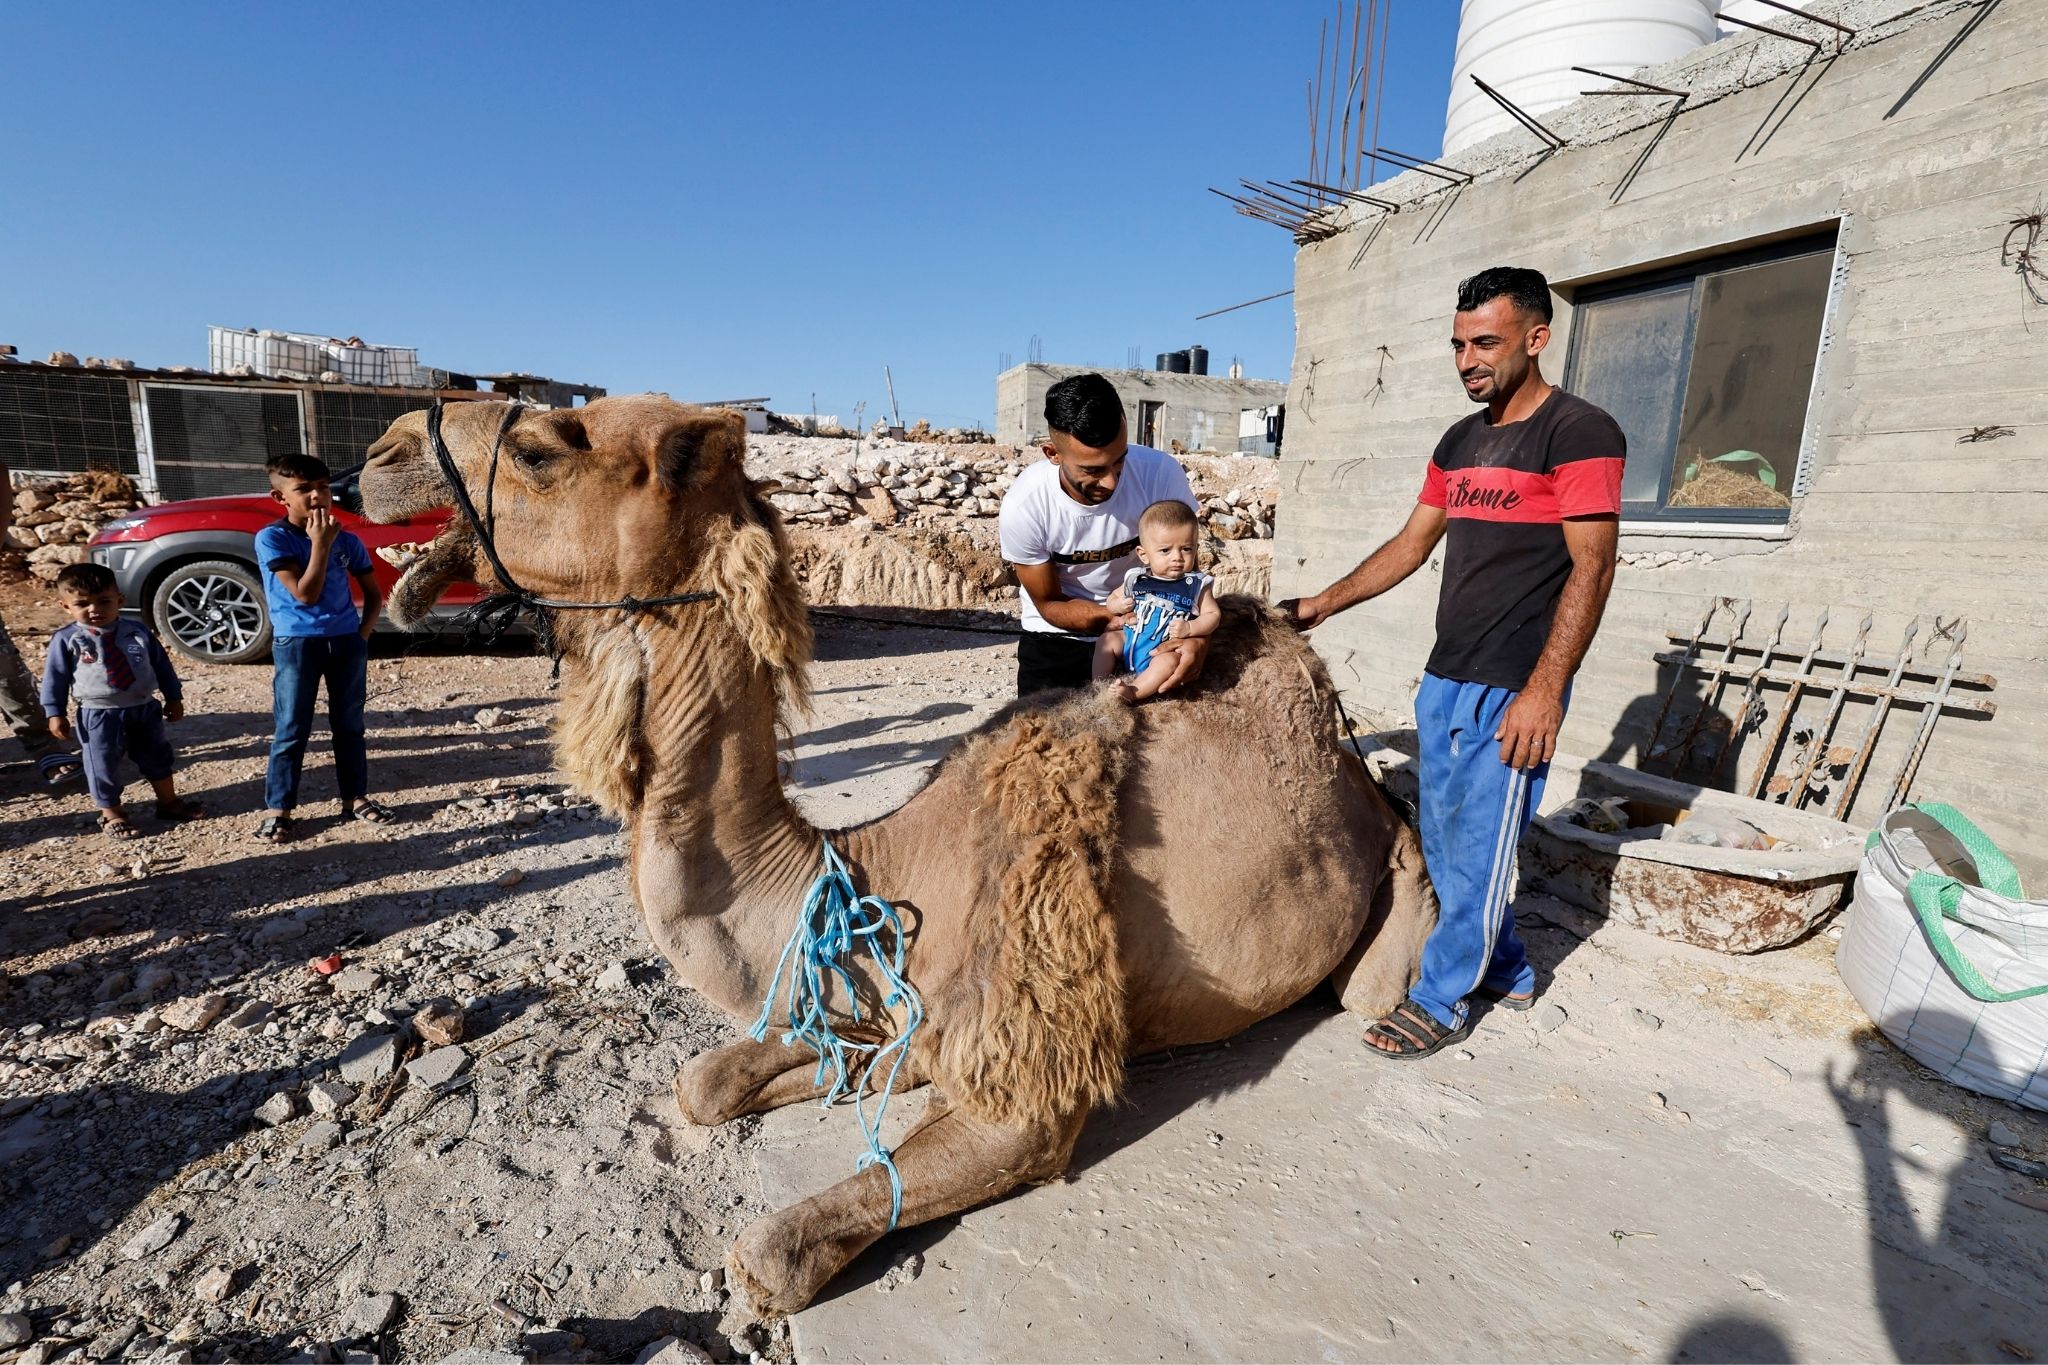 A Palestinian holds a baby ahead of the sacrifice of a camel on the first day of the Muslim holiday of Eid al-Adha, in Yatta, near Hebron in the Israeli-occupied West Bank July 9, 2022.